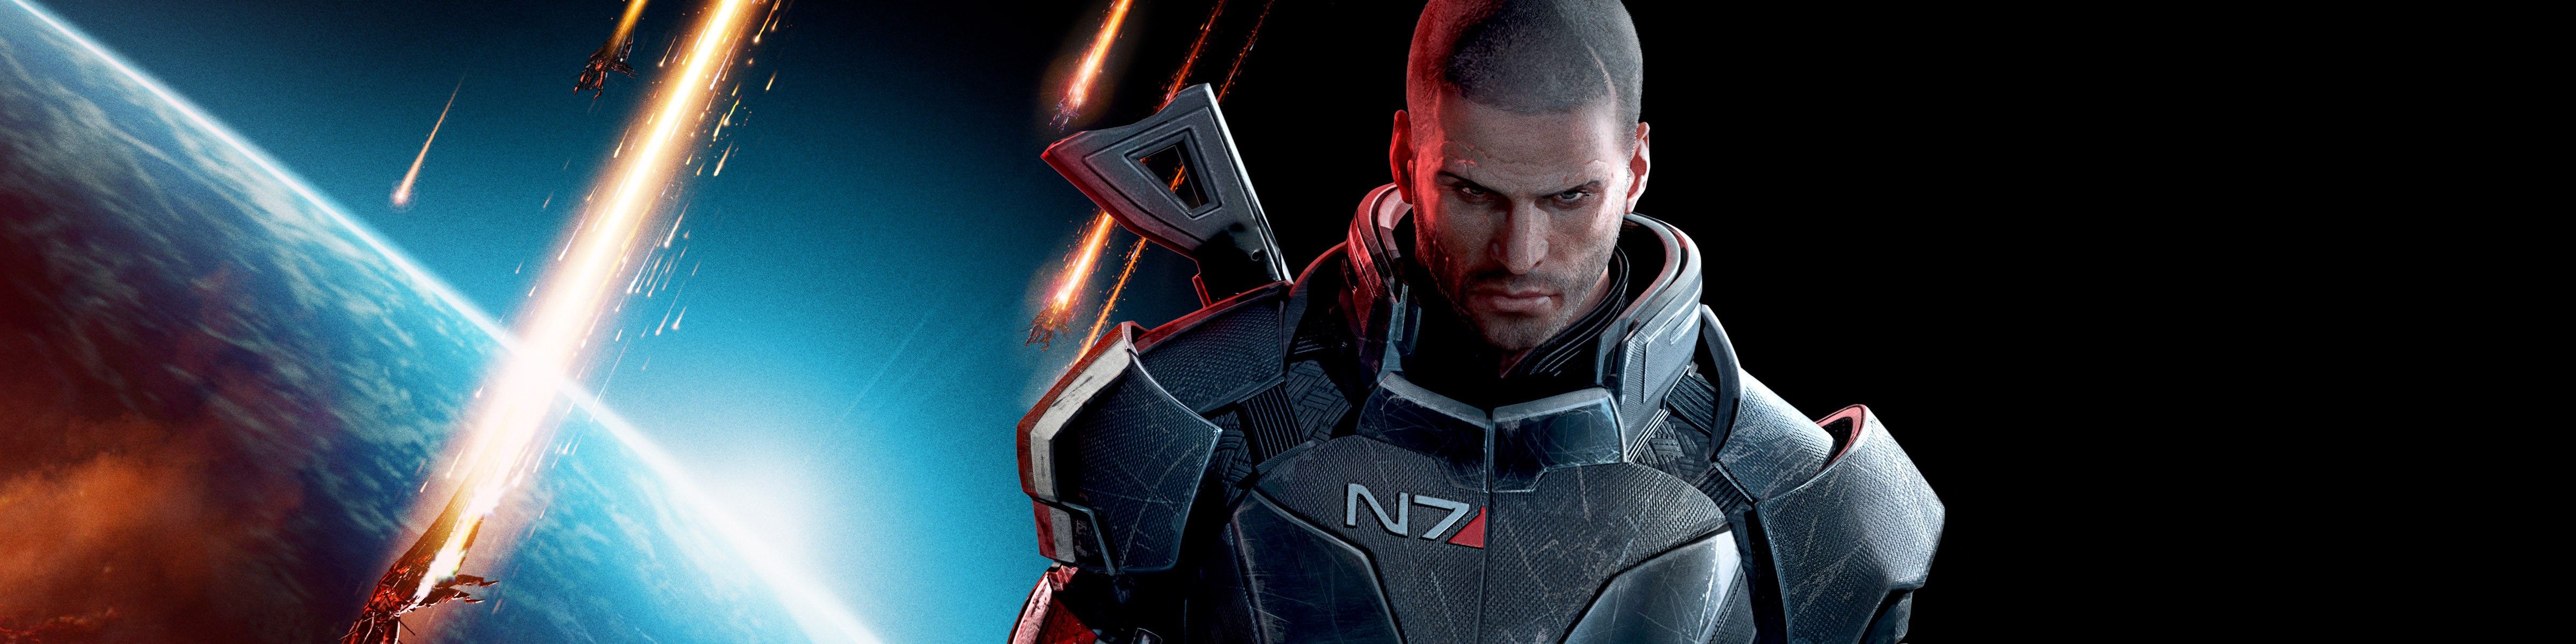 mass effect 3 dlc weapons not showing up